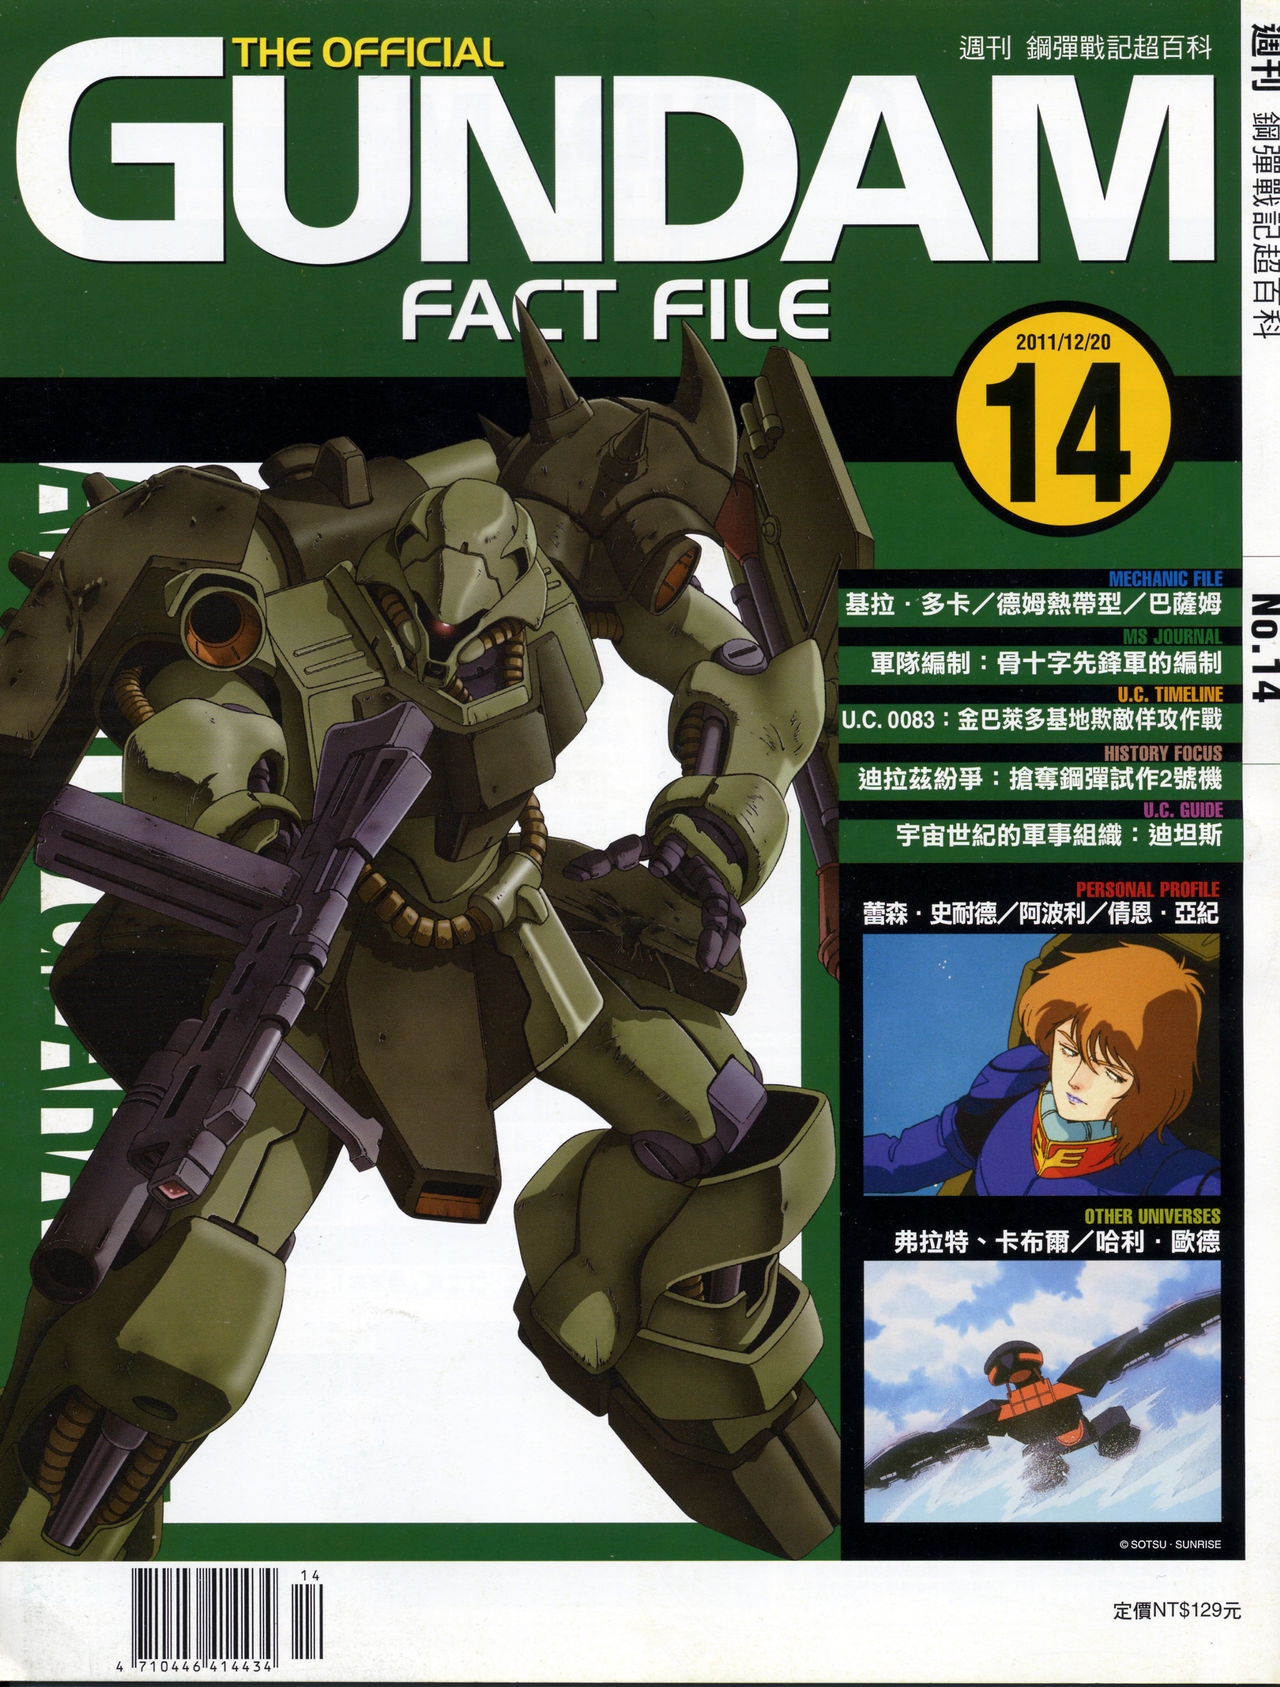 The Official Gundam Fact File - 014 [Chinese] 35